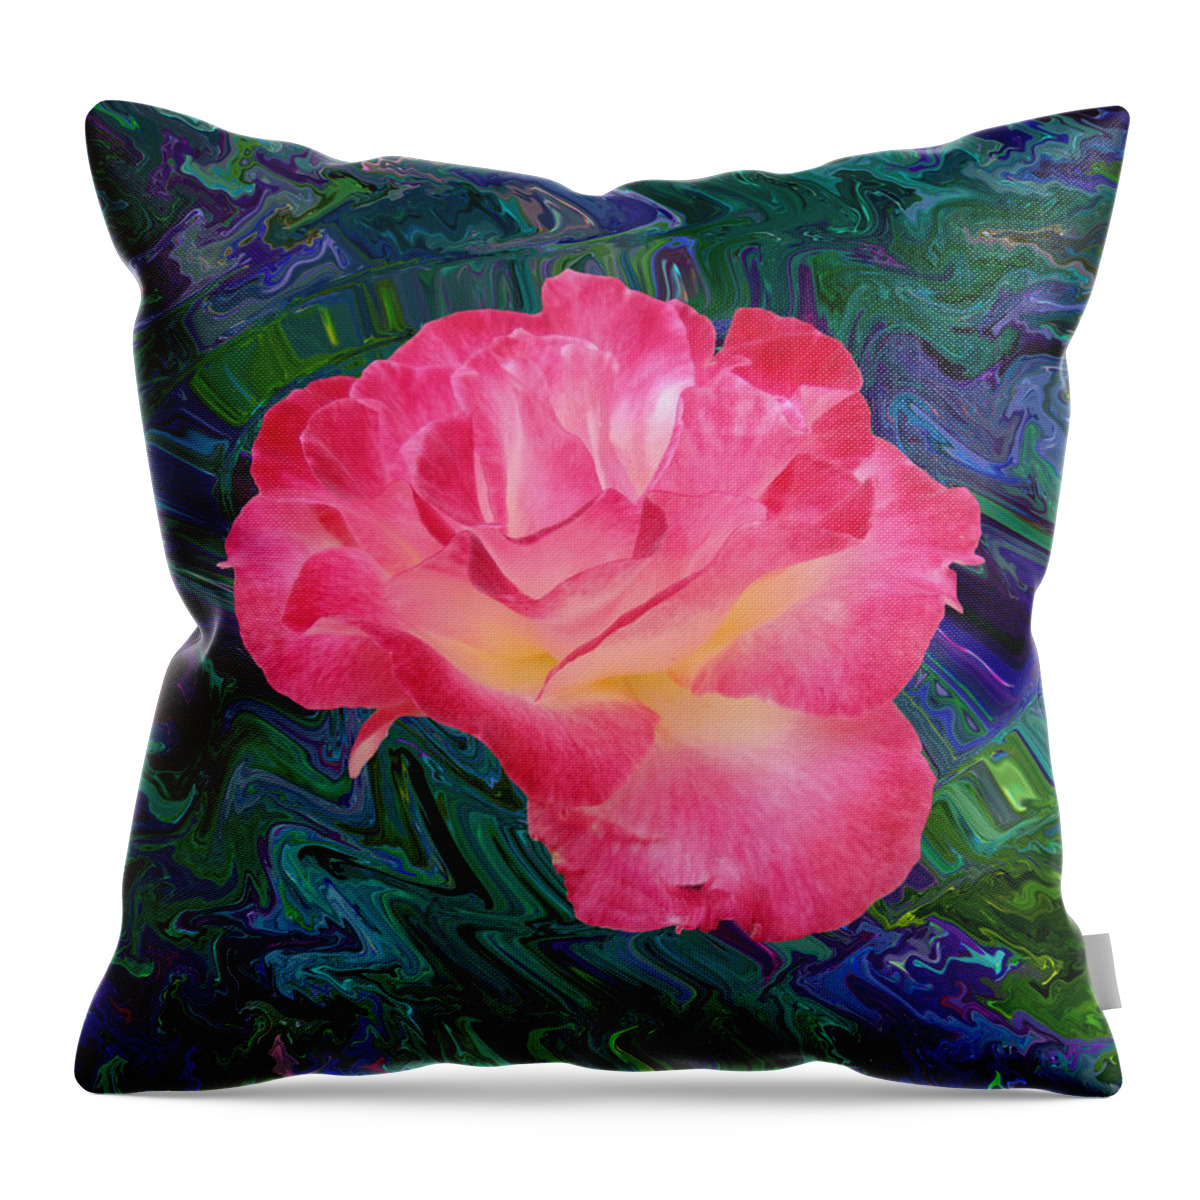 Rose In The Matter Of Your Hand V7 Throw Pillow featuring the photograph Rose In The Matter Of Your Hand V7 by Kenneth James